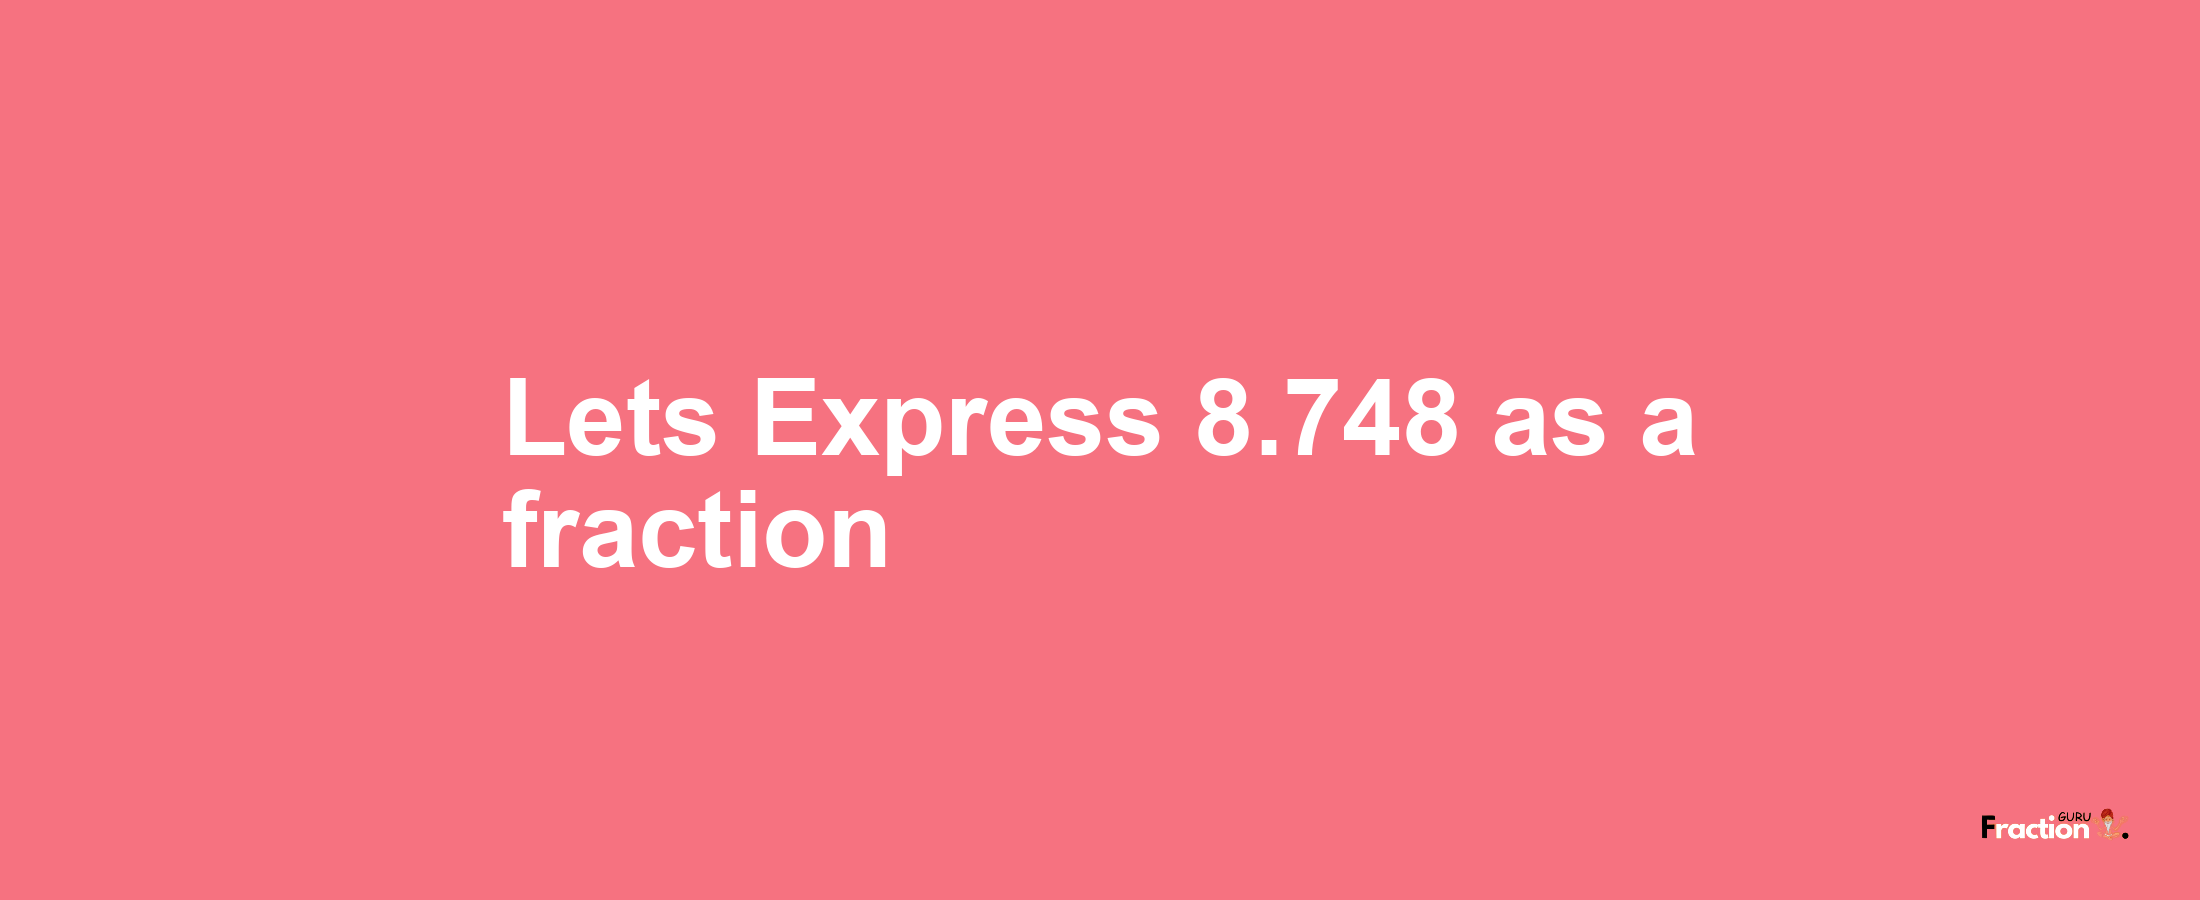 Lets Express 8.748 as afraction